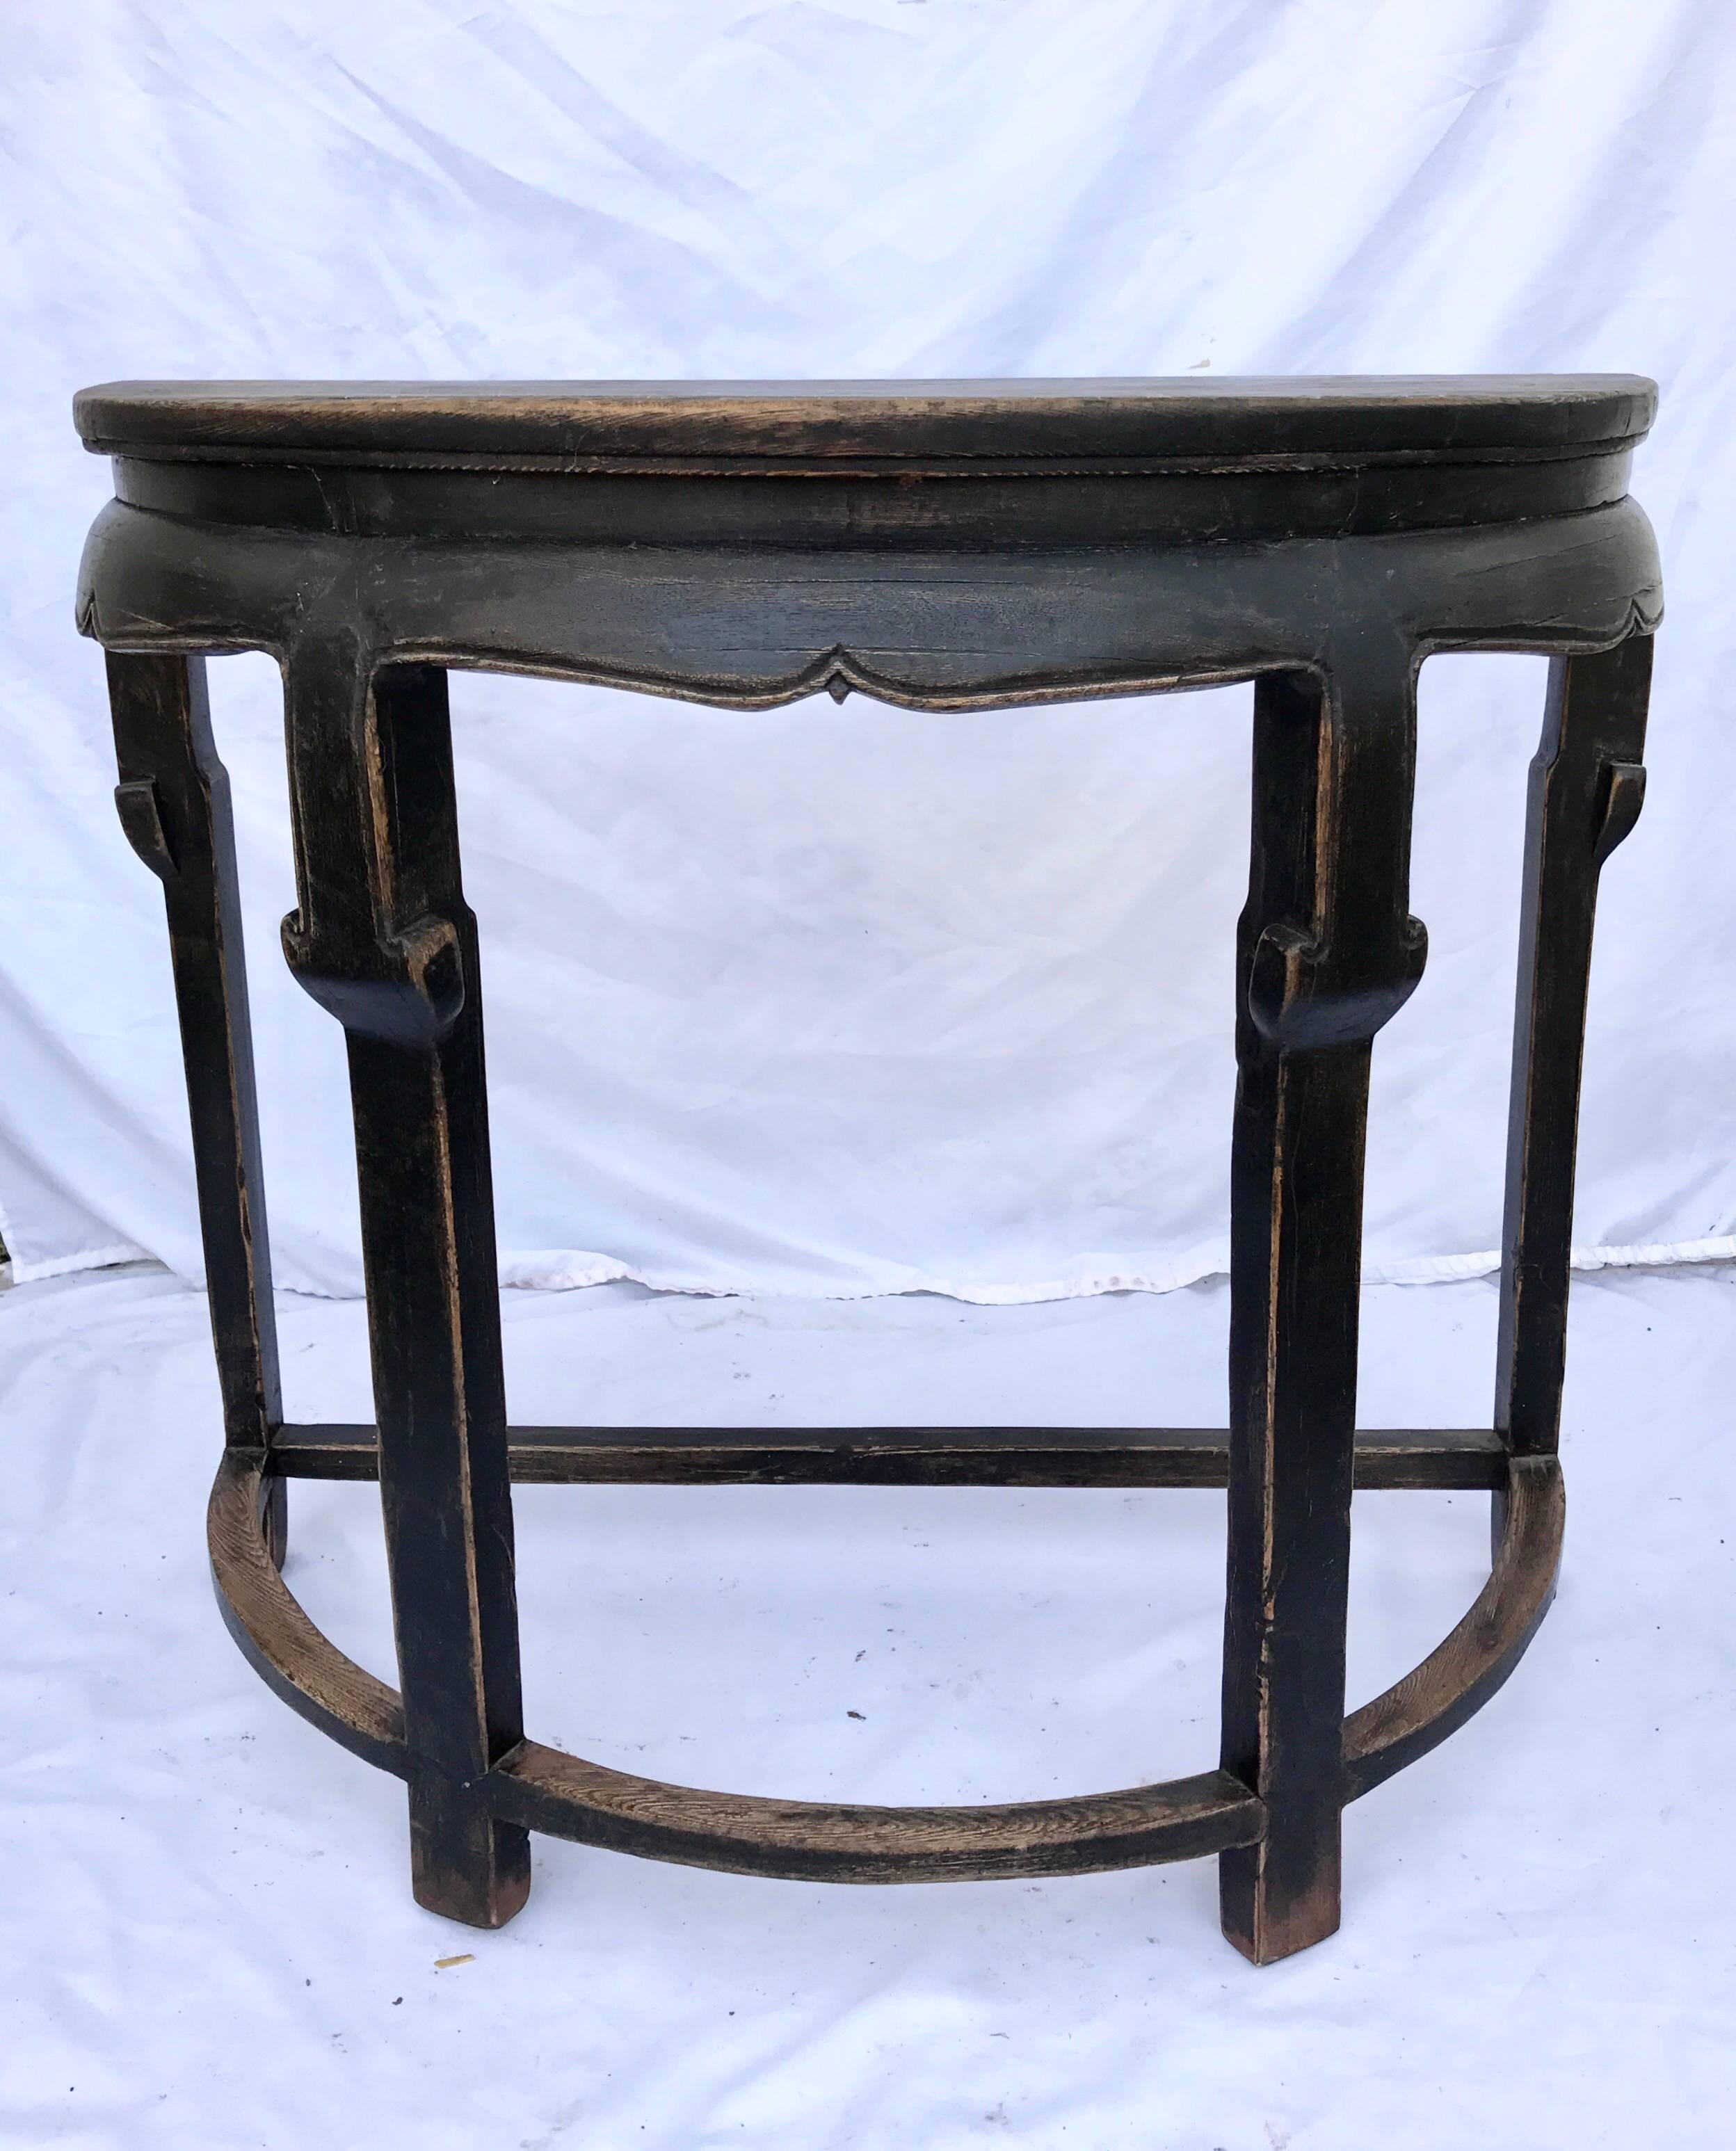 A good looking Chinese export console table of demilune form. Composed of stained and ebonized pine and elm, the half round table is as versatile as any table out there. Simple rustic elegance and classic refined lines here. 